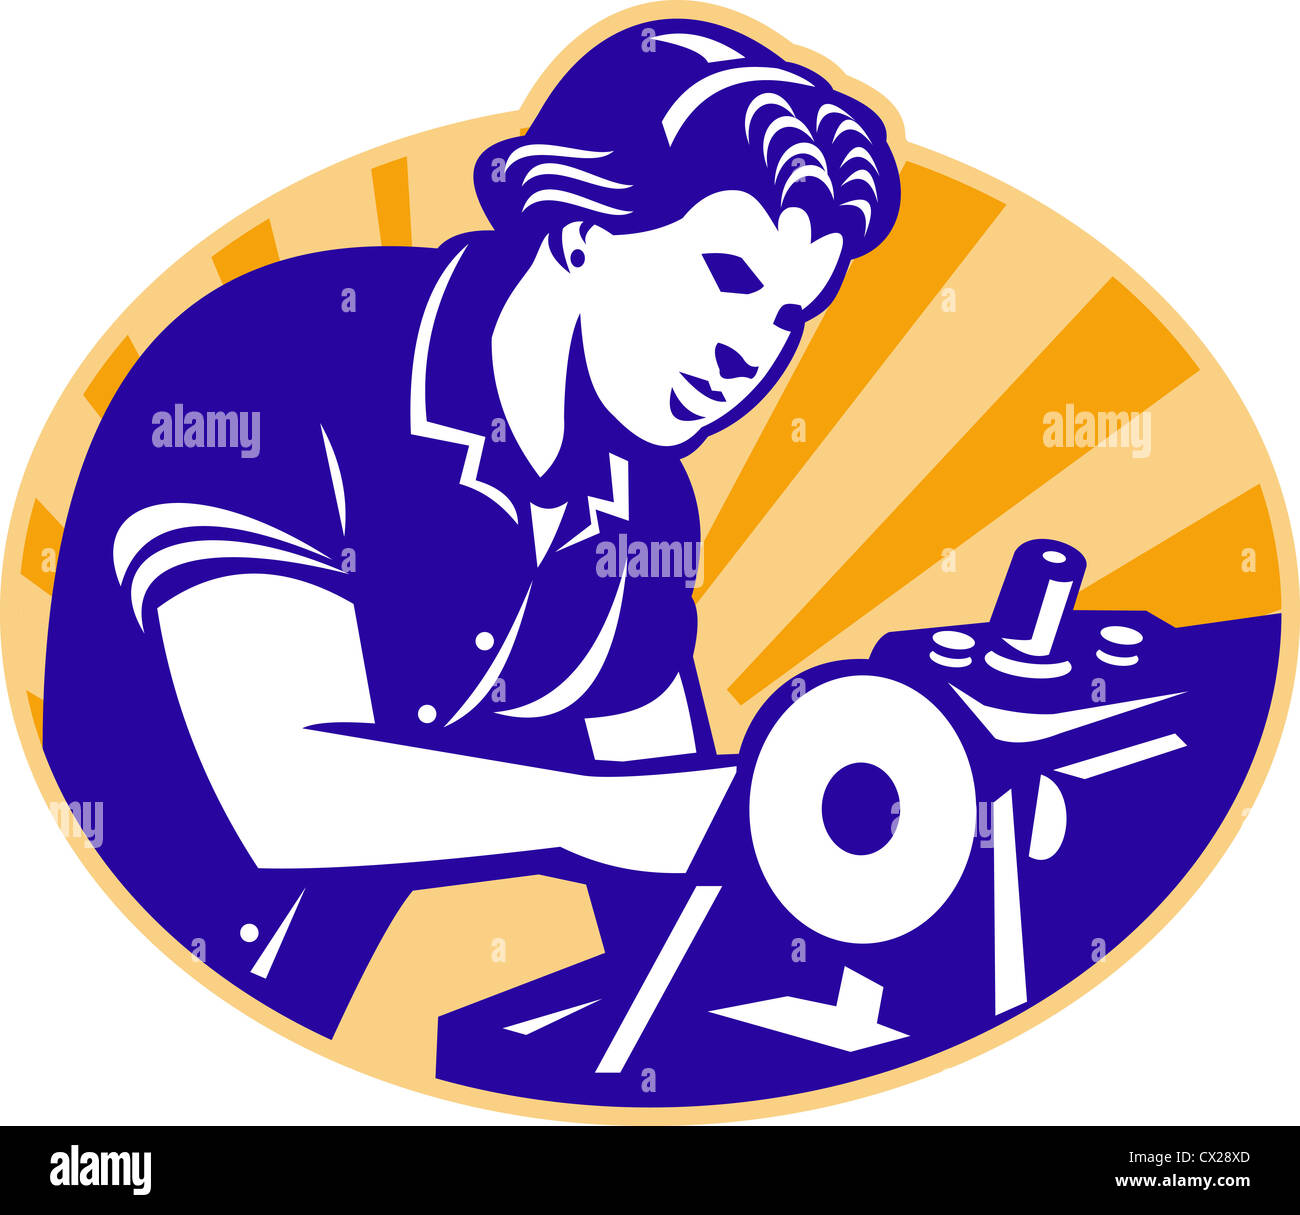 Illustration of a female machinist seamstress worker sewing on machine set inside circle done in retro style. Stock Photo